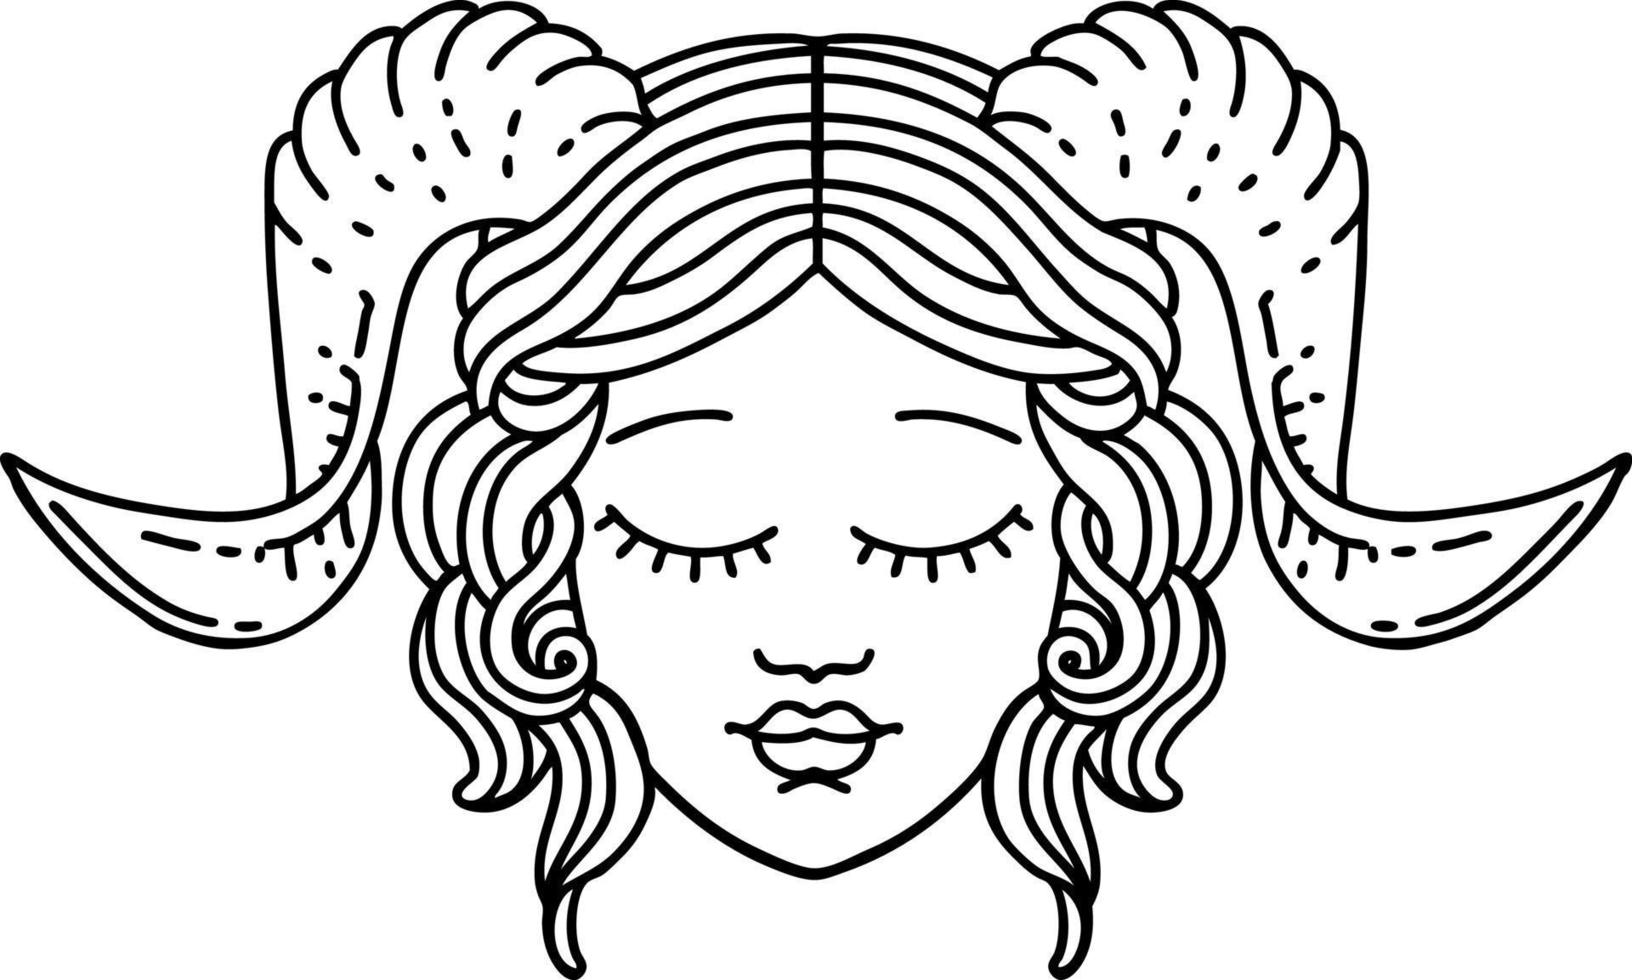 Black and White Tattoo linework Style tiefling character face vector